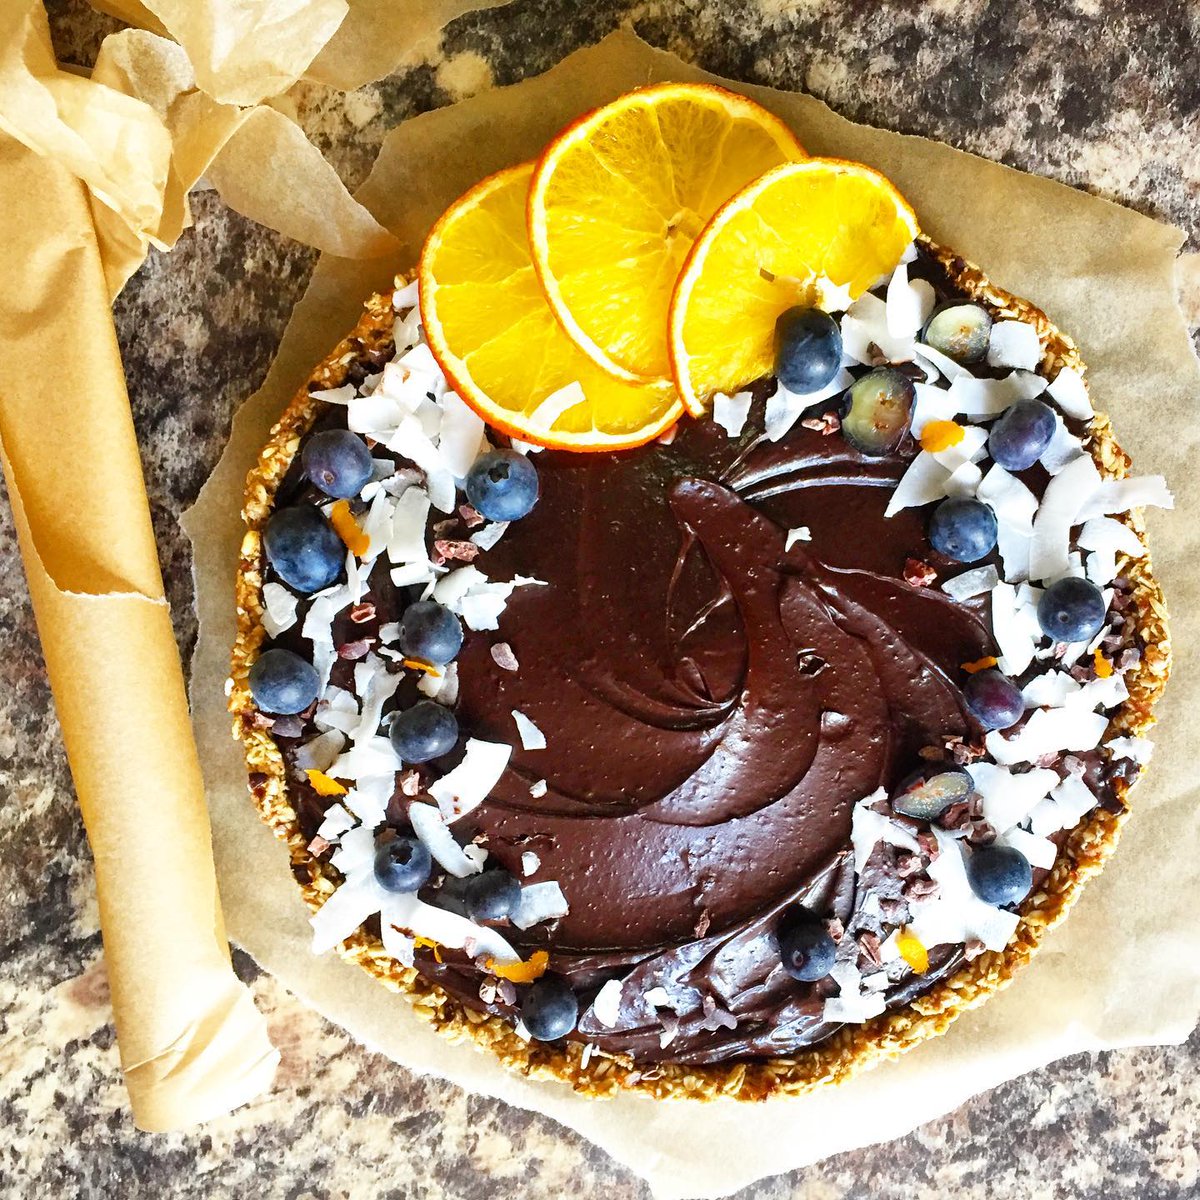 raw chocolate orange torte - naturally gluten and refined sugar-free - made with avocado flesh! @bespokecakes made to order London-wide 
@vgnldn @LondonVeganSoc